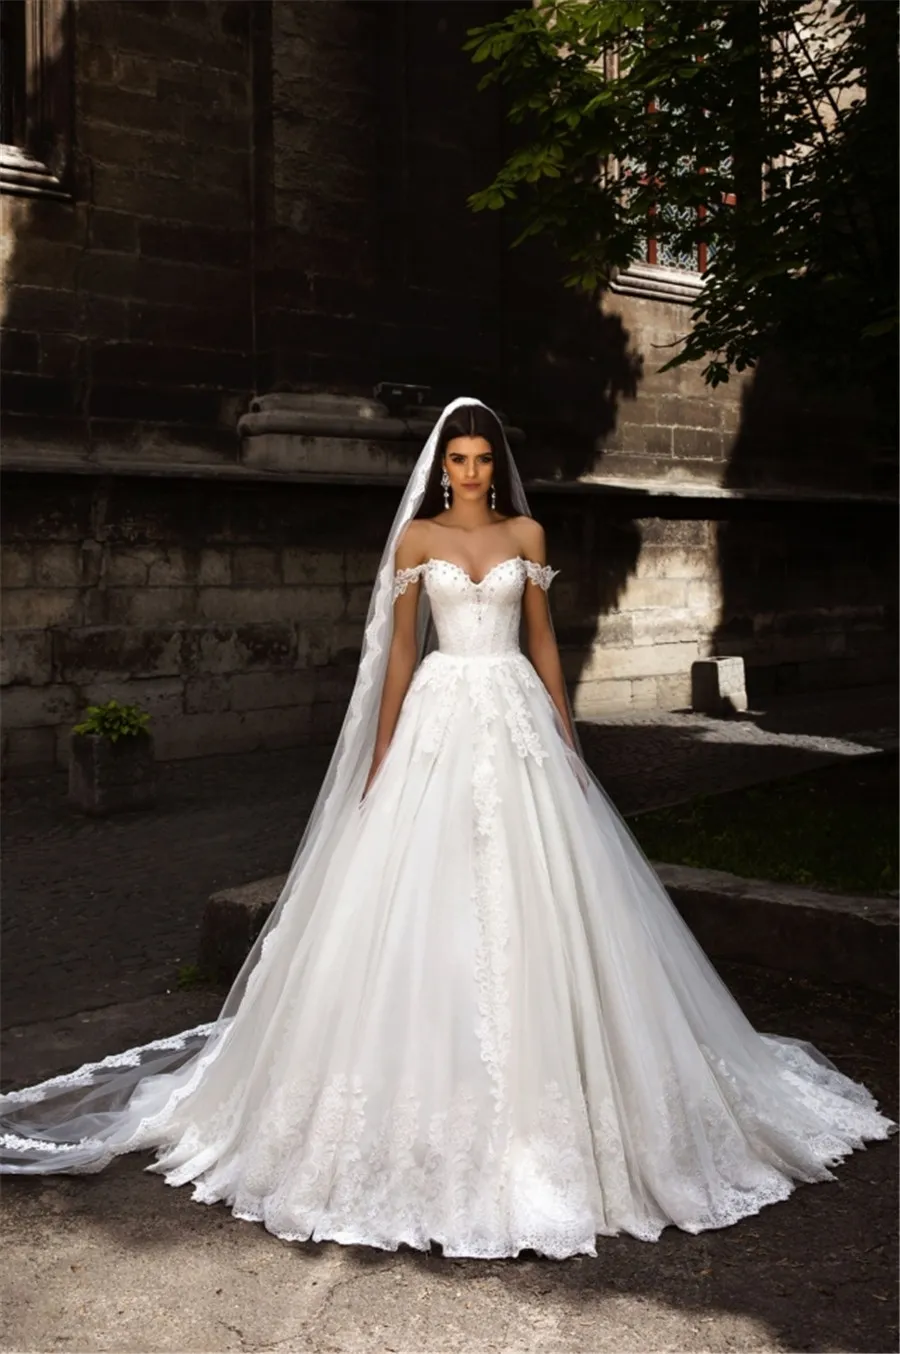 Sexy Ball Gown Wedding Dresses 2019 Cap Sleeve Court Train Lace Up Back Bridal Gown White Lace Custom Made robe de mariage